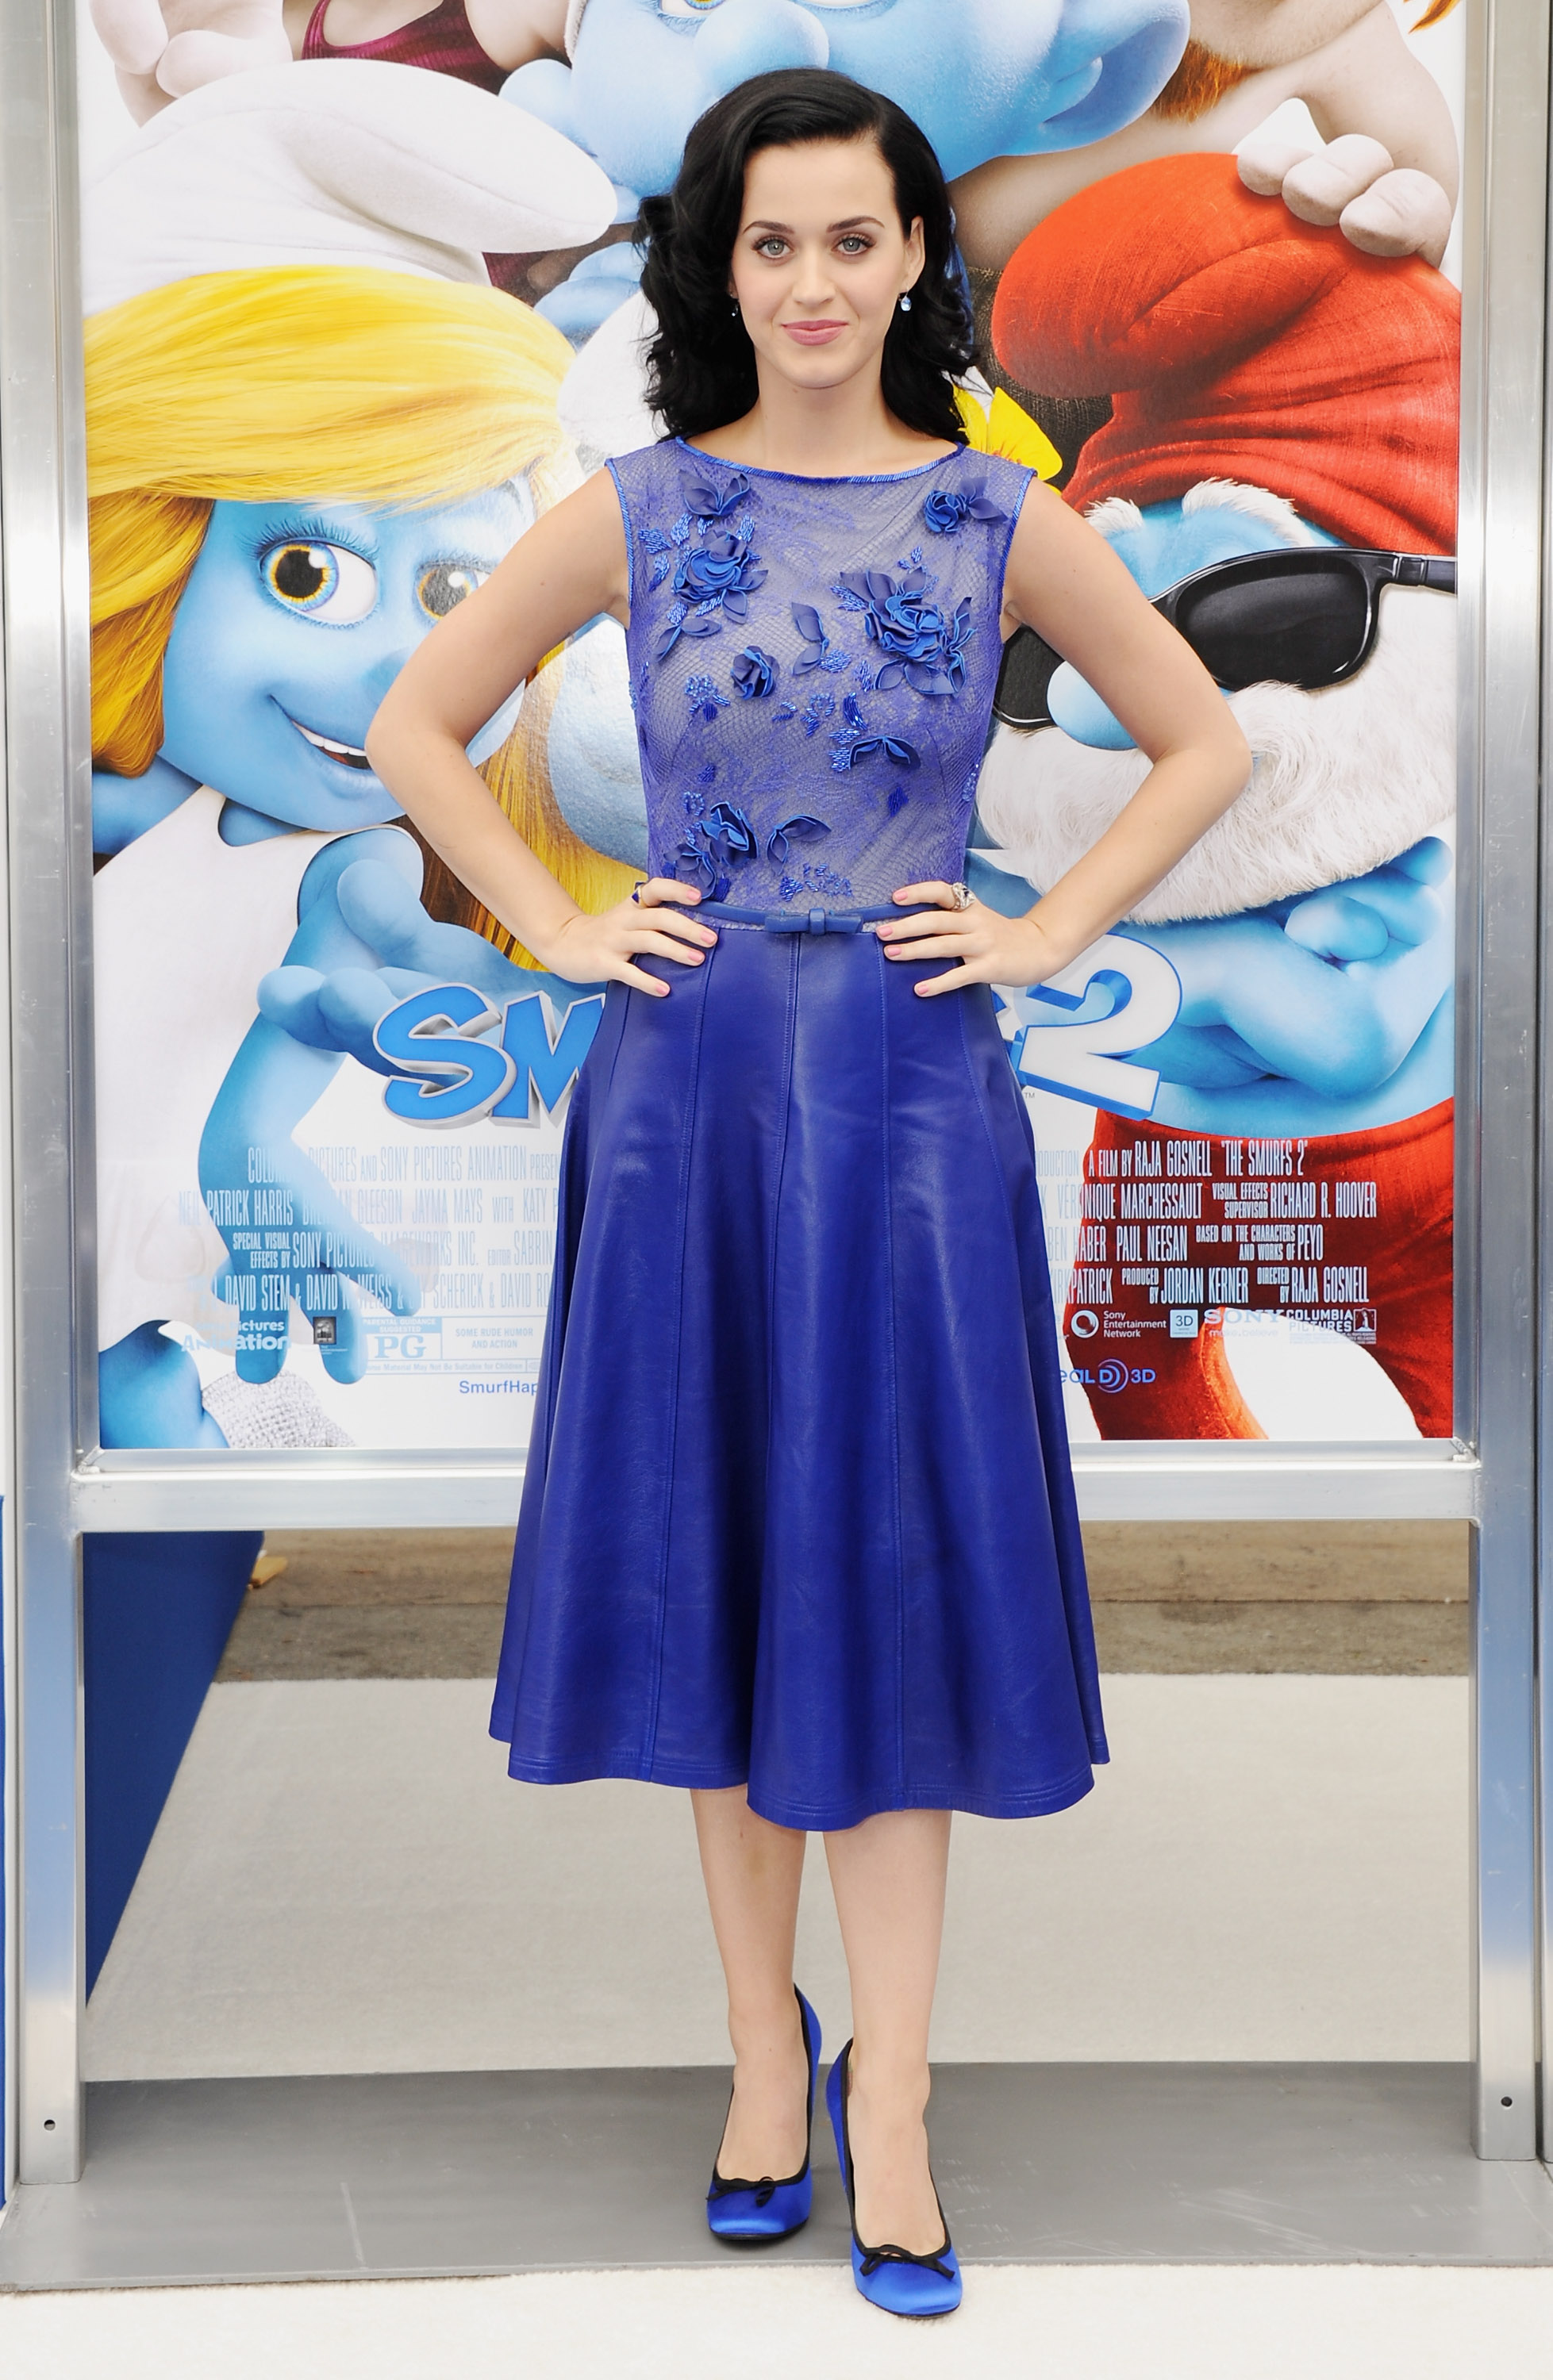 Katy voiced the character of Smurfette in the first two movies in the Smurf movie franchise